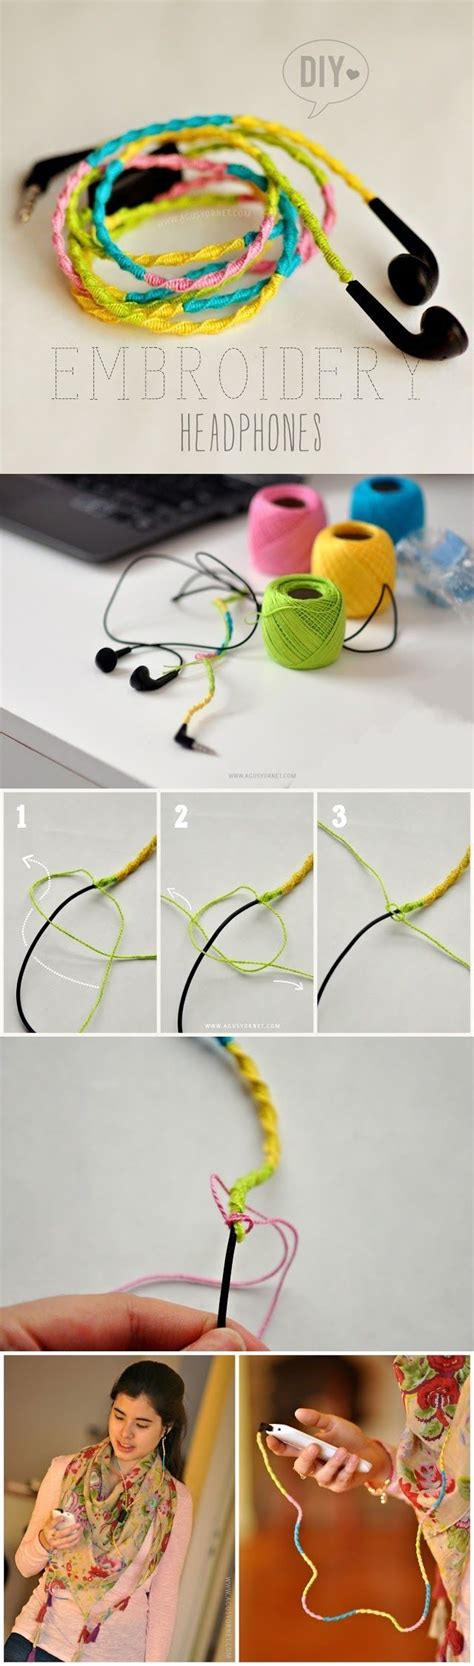 6 Amazingly Creative Arts And Crafts Ideas To Try Out On A